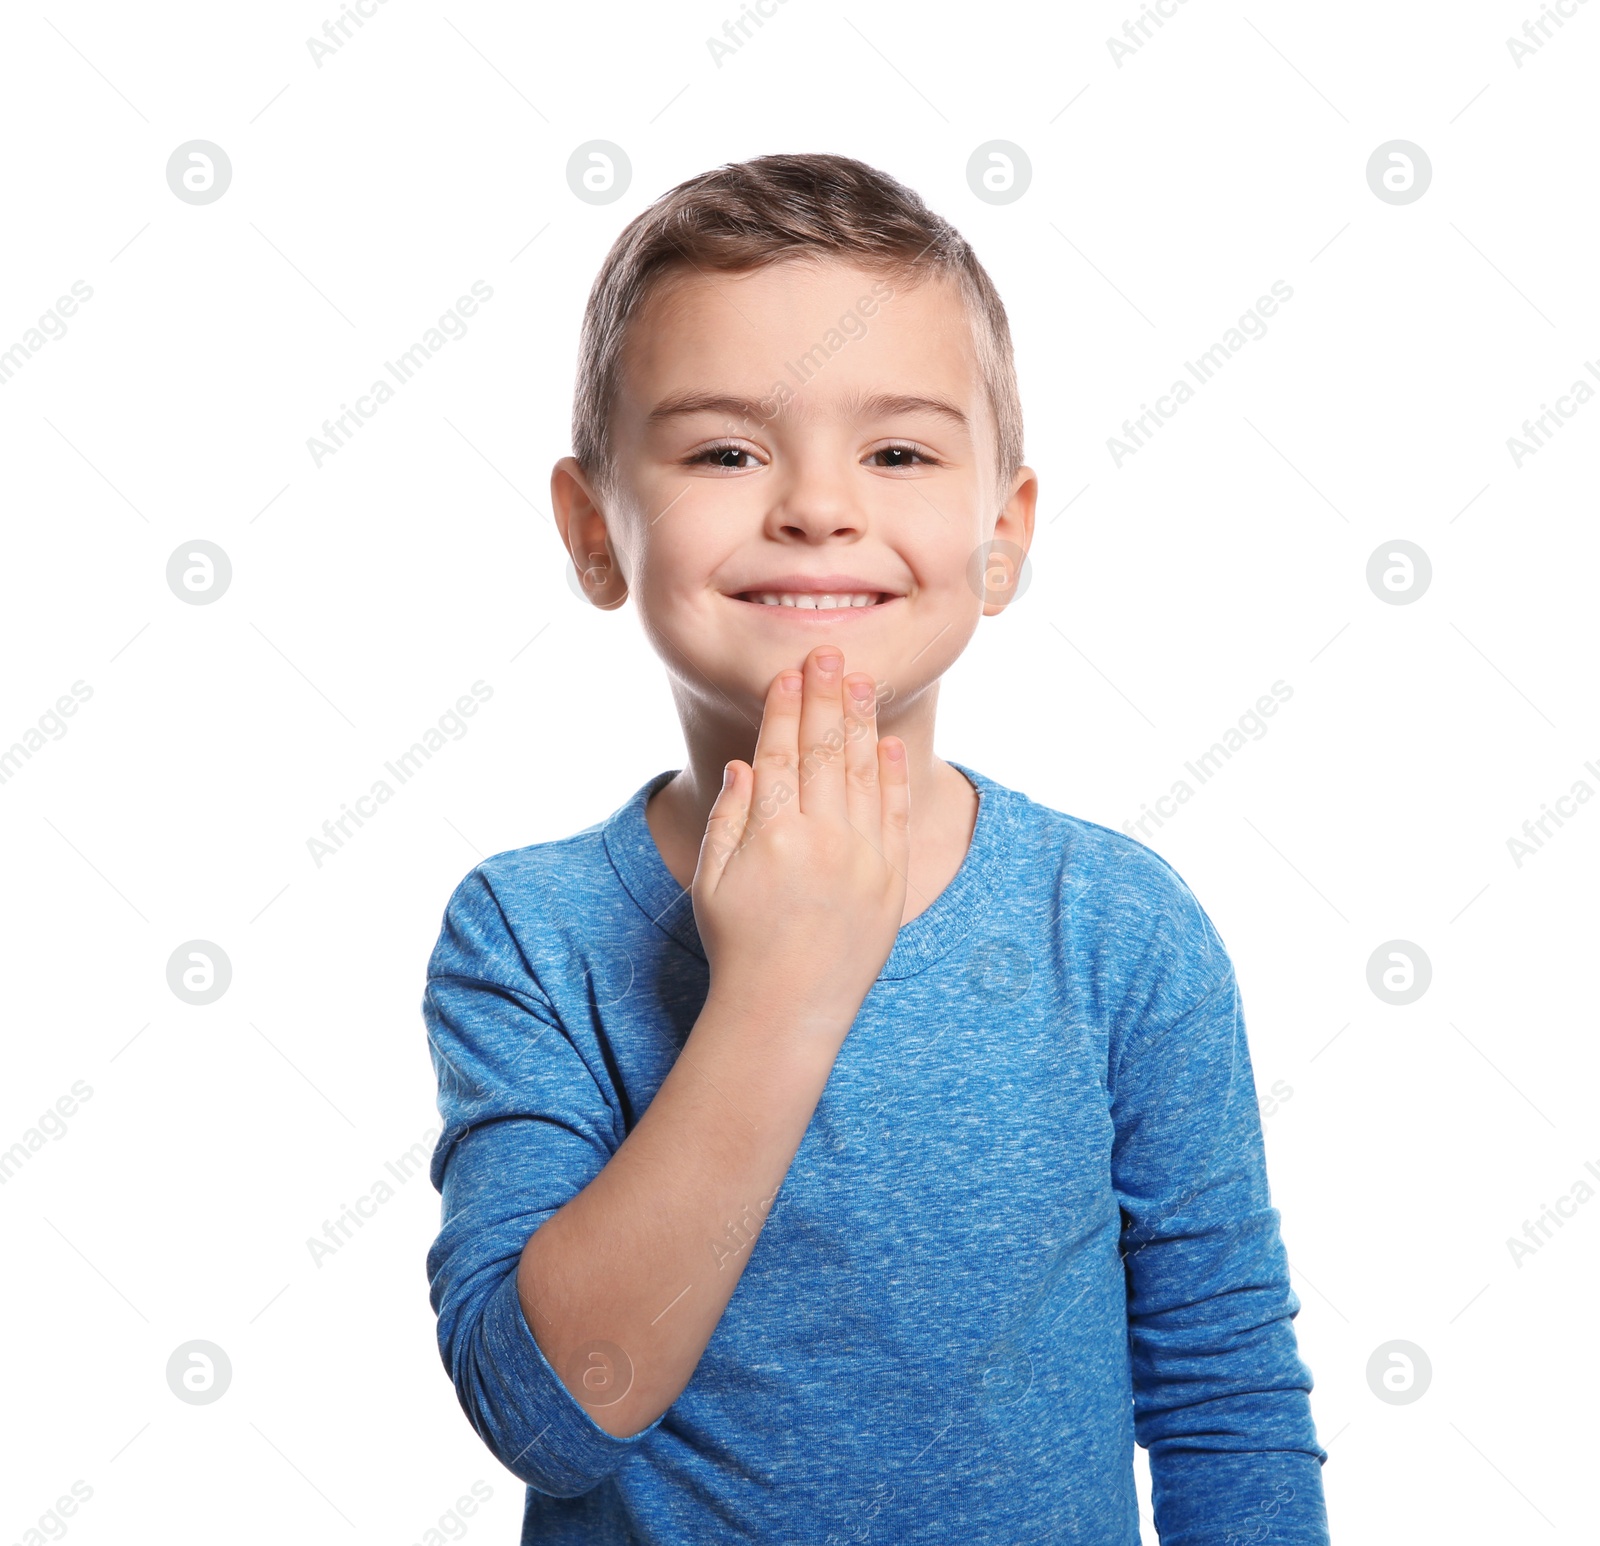 Photo of Little boy showing THANK YOU gesture in sign language on white background